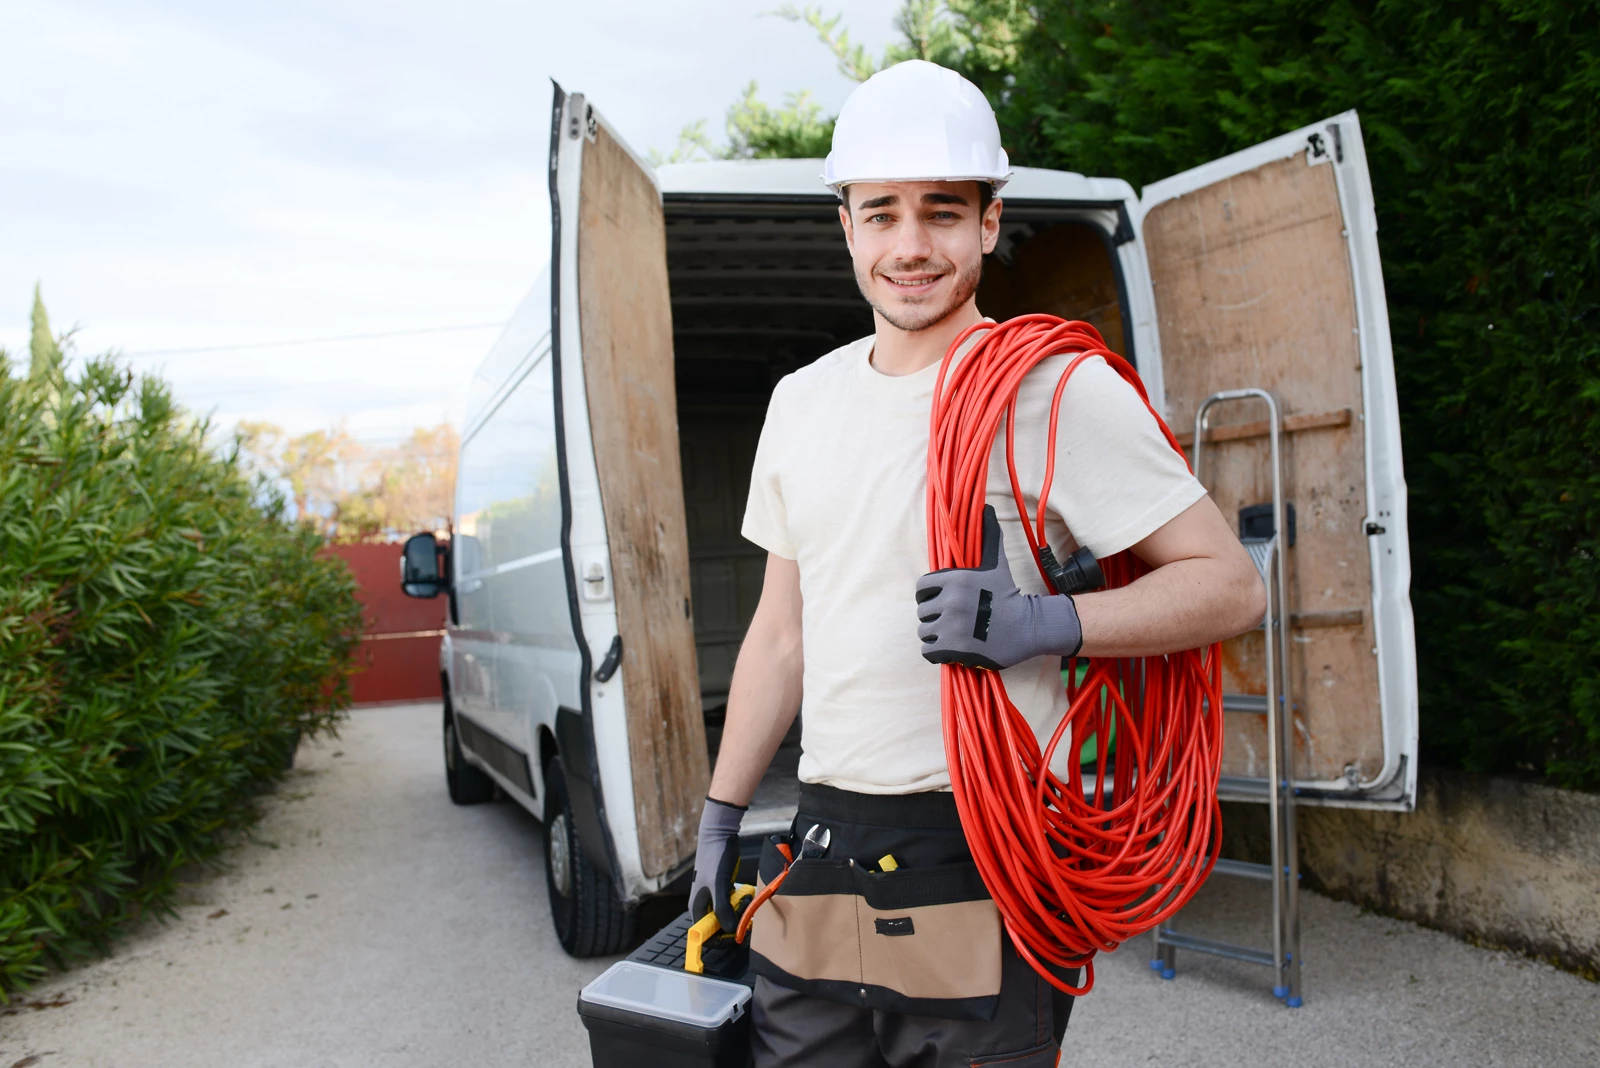 A contractor standing next to his van with equipment